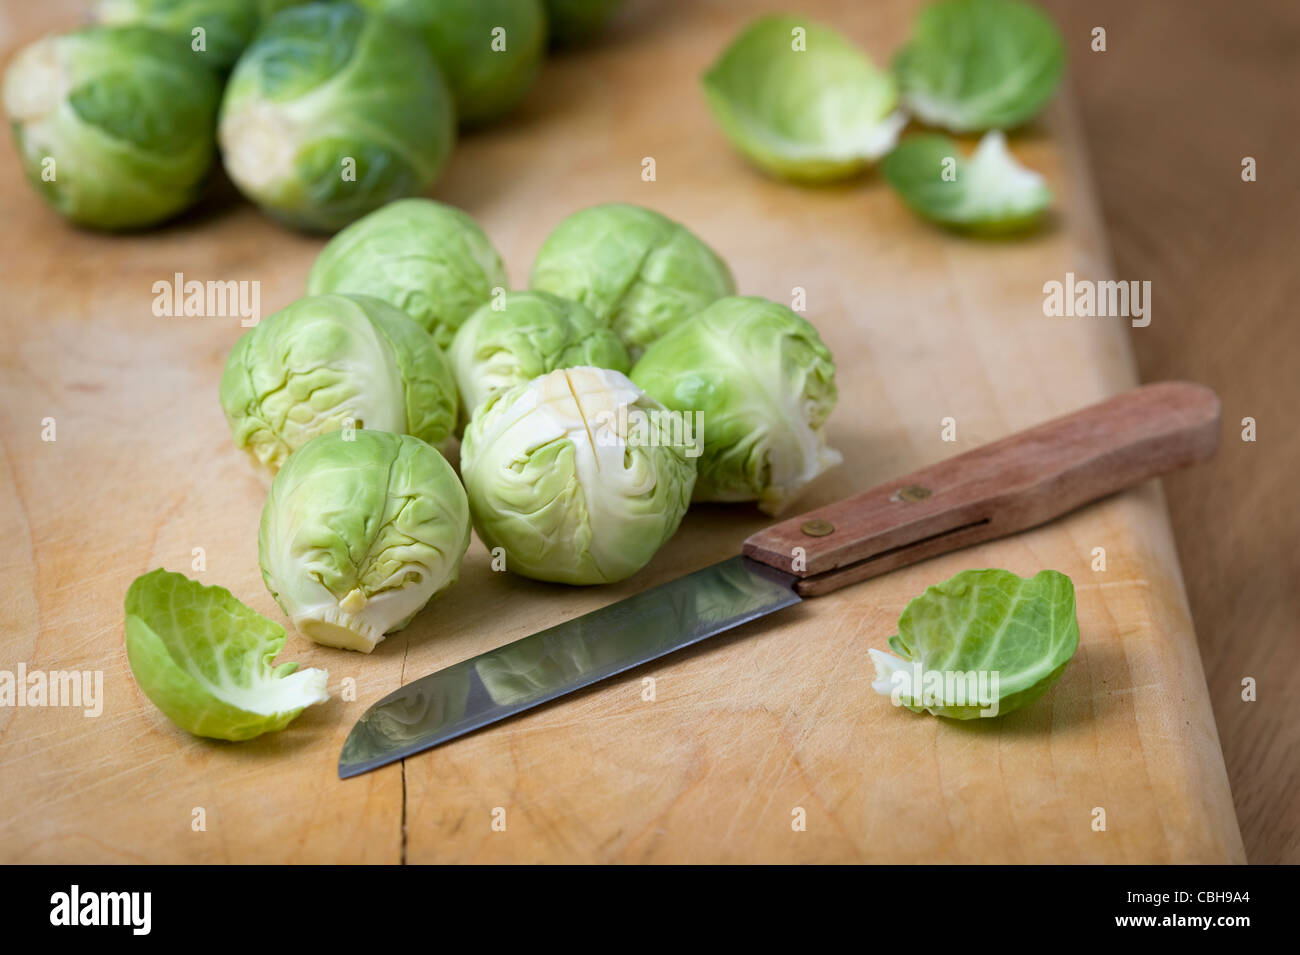 preparing brussel sprouts for cooking Stock Photo